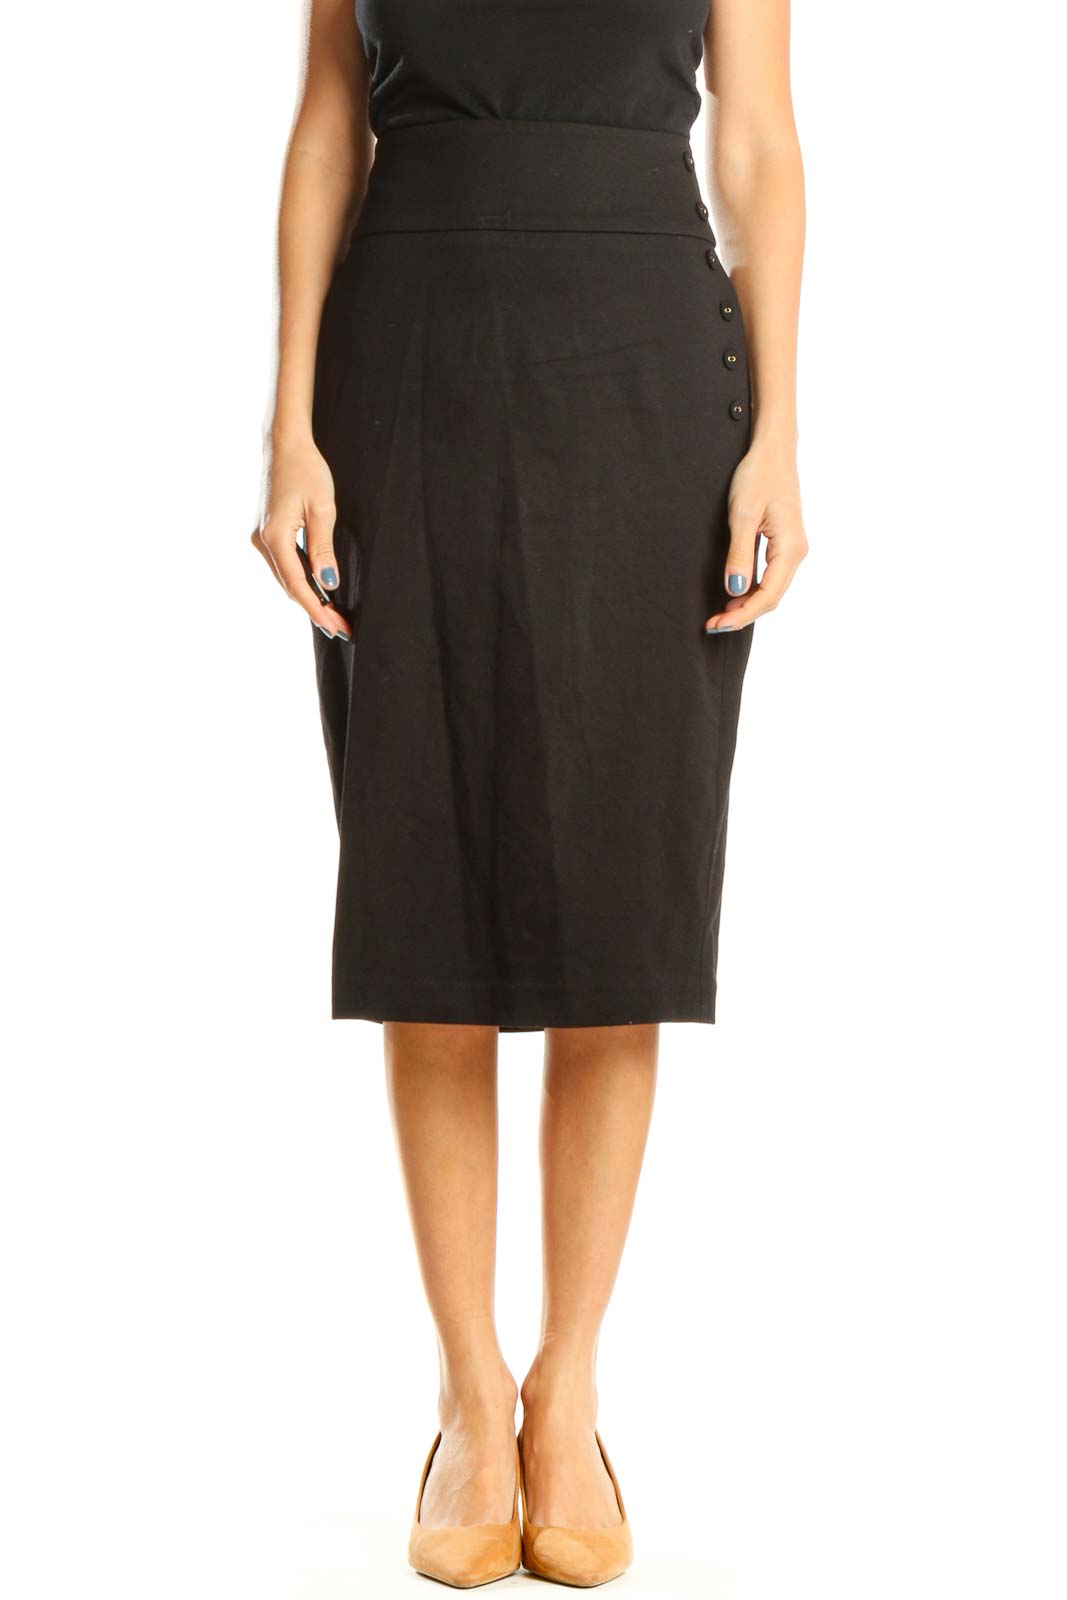 Black Classic Pencil Skirt with Button Detail Front